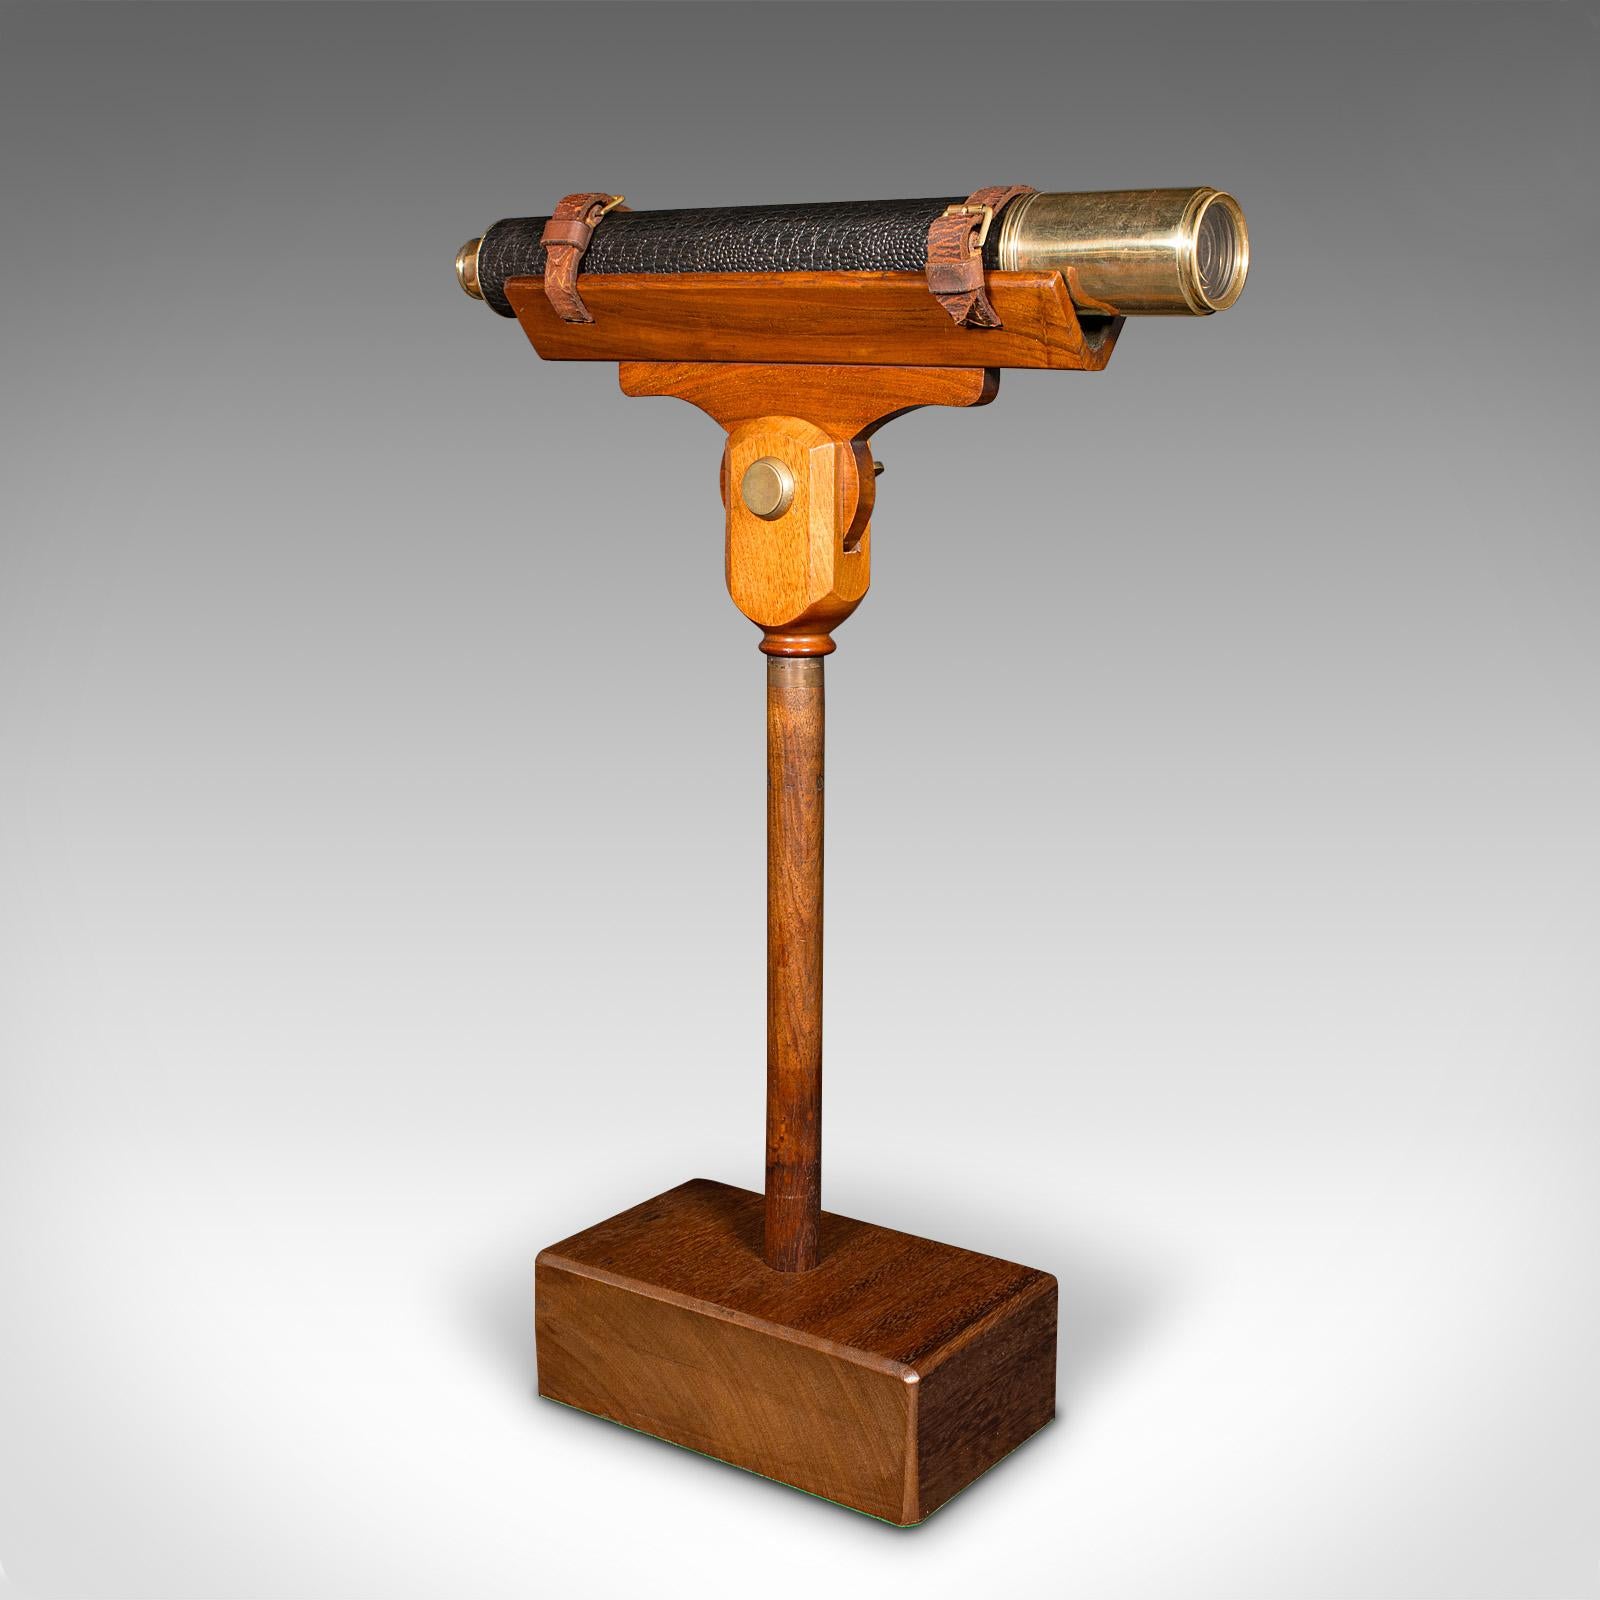 This is an antique maritime telescope. An English, brass and walnut mounted ship's instrument by J. Sewill, dating to the Victorian period, circa 1870.

Perfect for bird watching, landscape appreciation, wildlife stalking, or maritime observation.